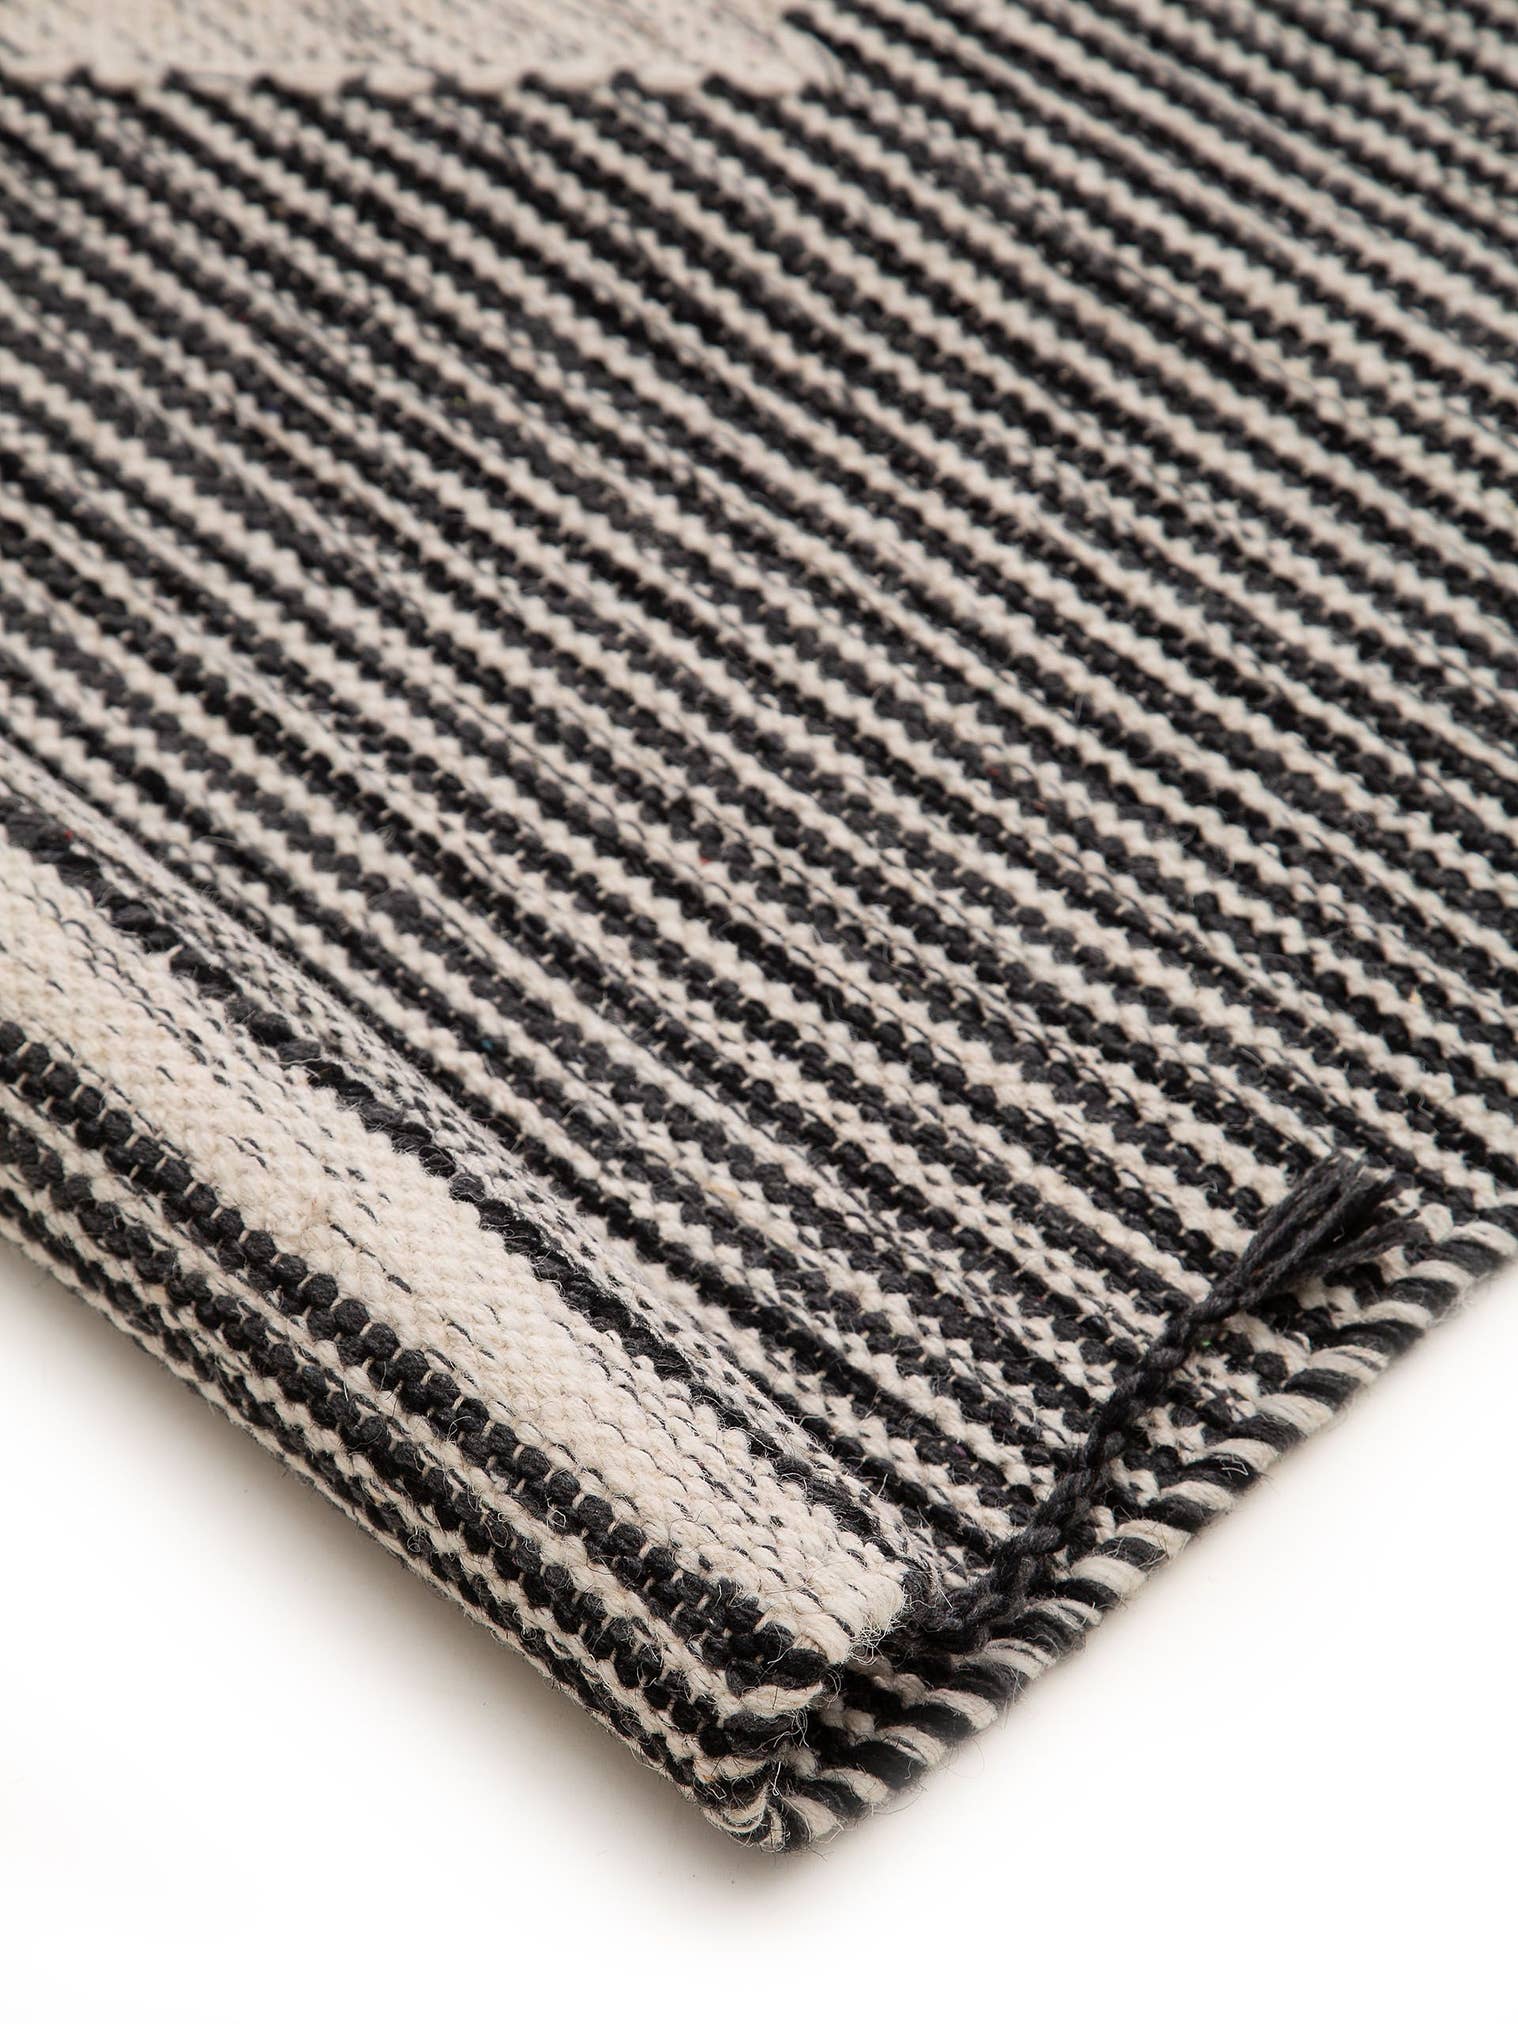 Rug made of 50% Wool, 50% Cotton in Black/White with a 1- 5 mm high pile by benuta Pure